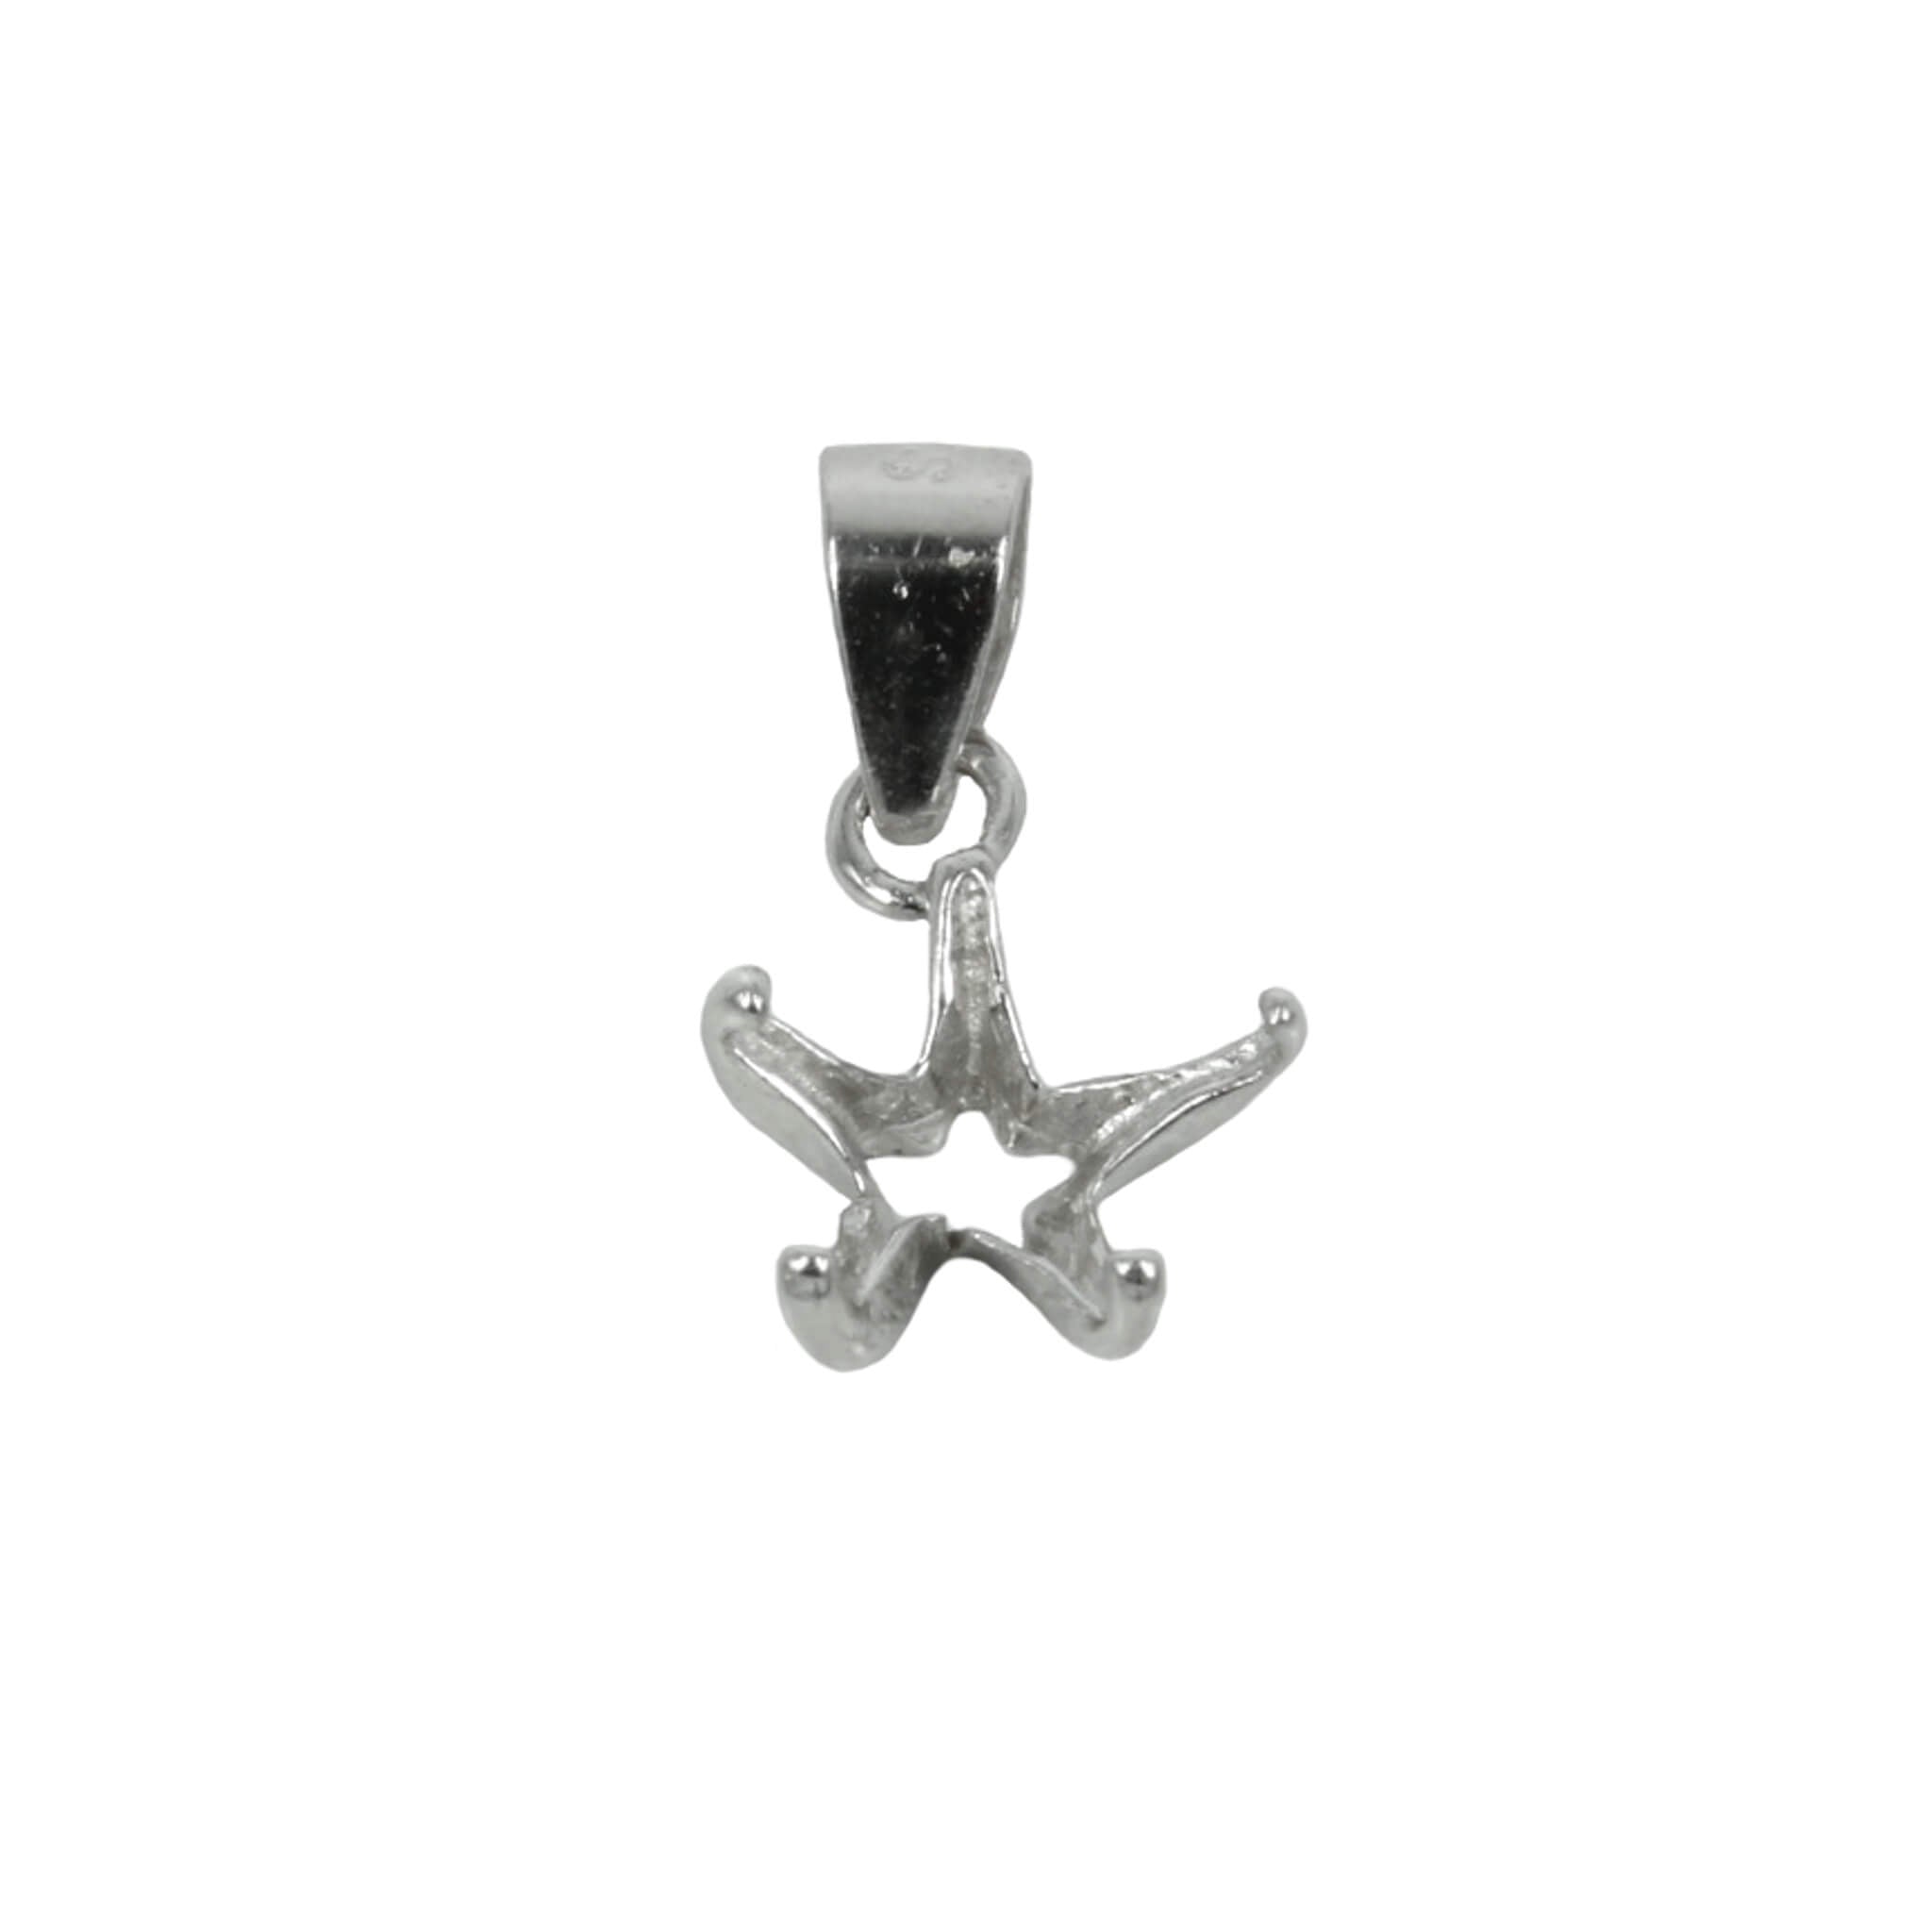 5-Prongs Pendant Setting with Round Prongs Mounting including Bail in Sterling Silver 7mm